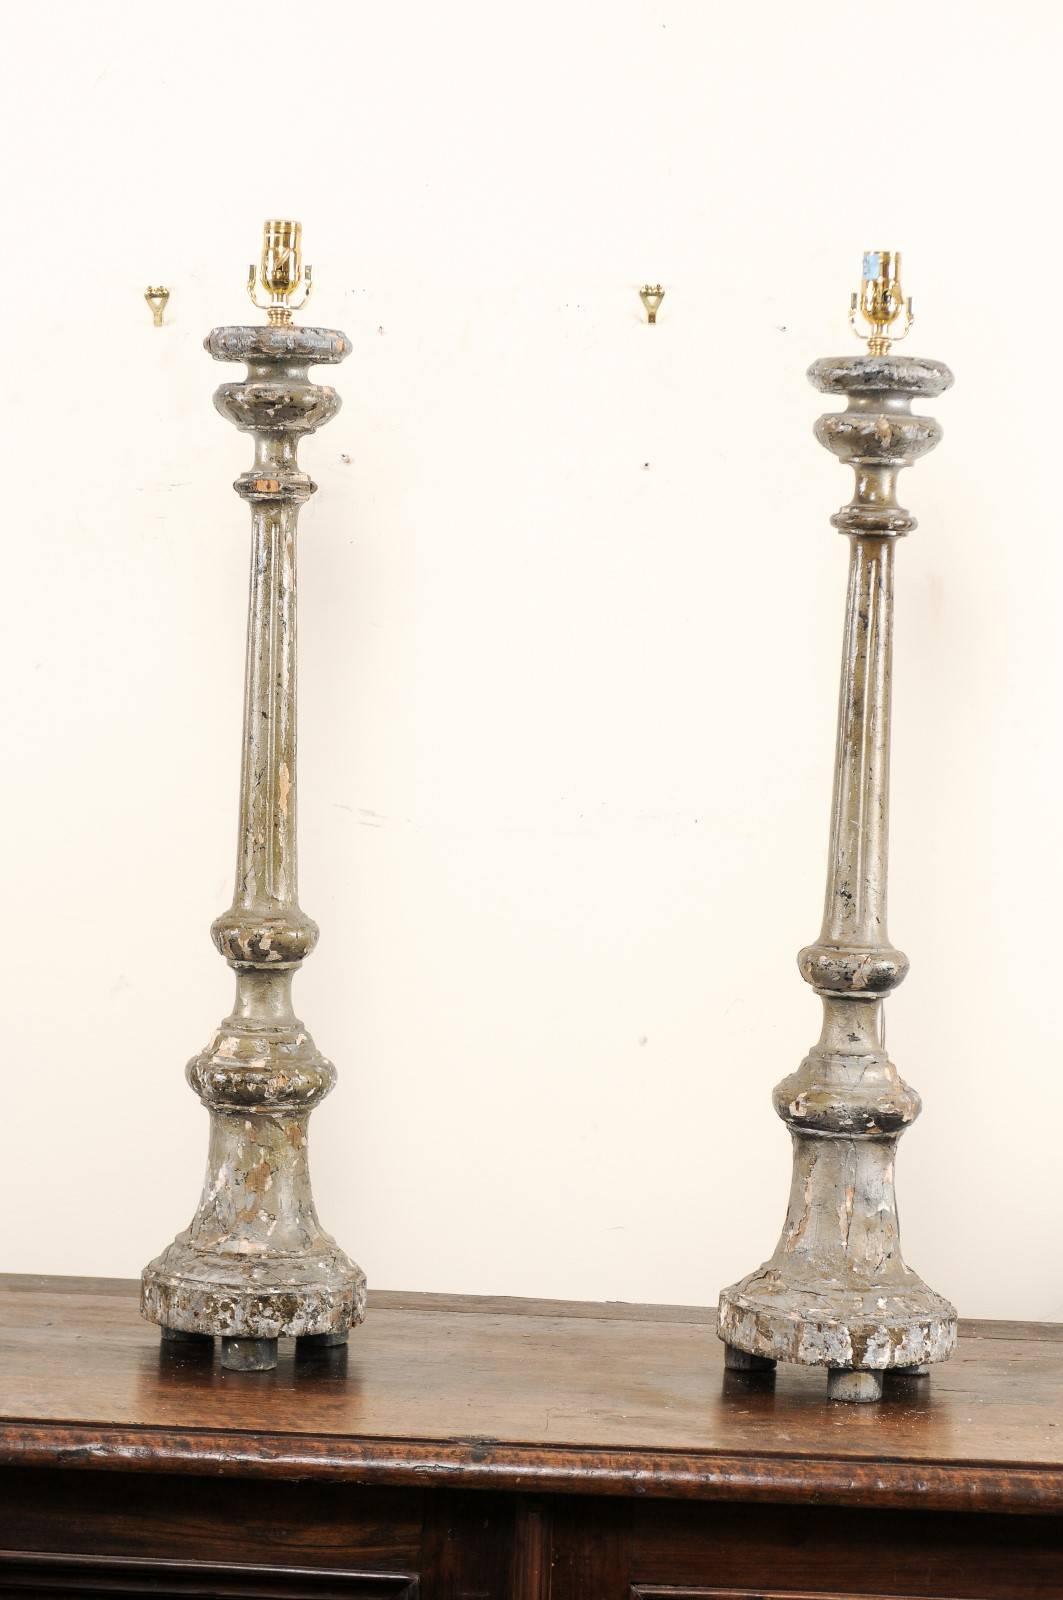 A pair of Italian 19th century carved wood altar sticks made into table lamps. This pair of Italian table lamps have been fashioned from antique altar sticks with silver leaf and gesso over carved wood. They are nicely shaped with fluted details and